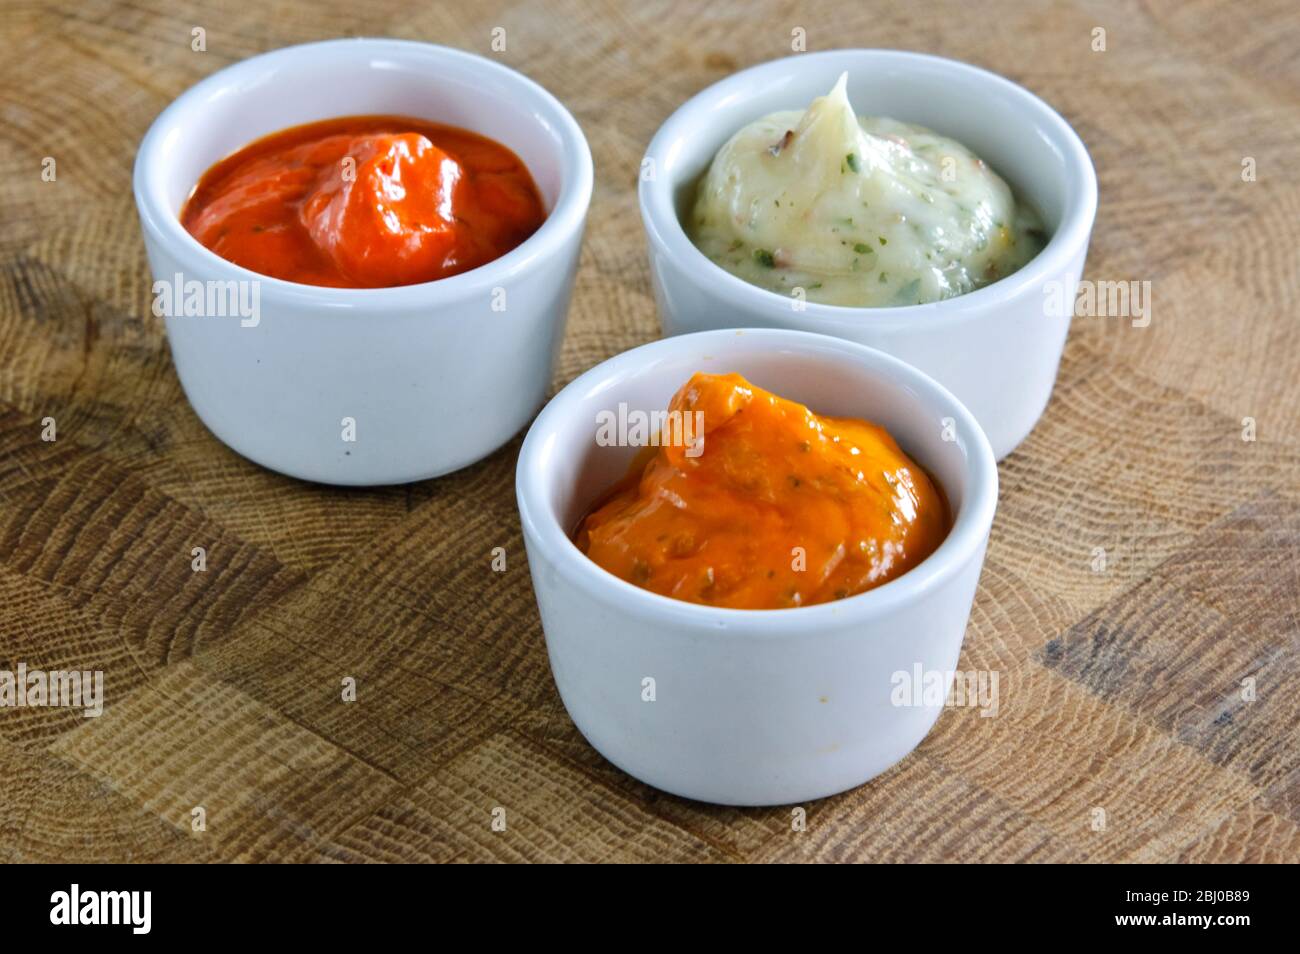 Small pots of commercial sauces used for glazing meaat before grilling. Also can be used as relish - Stock Photo